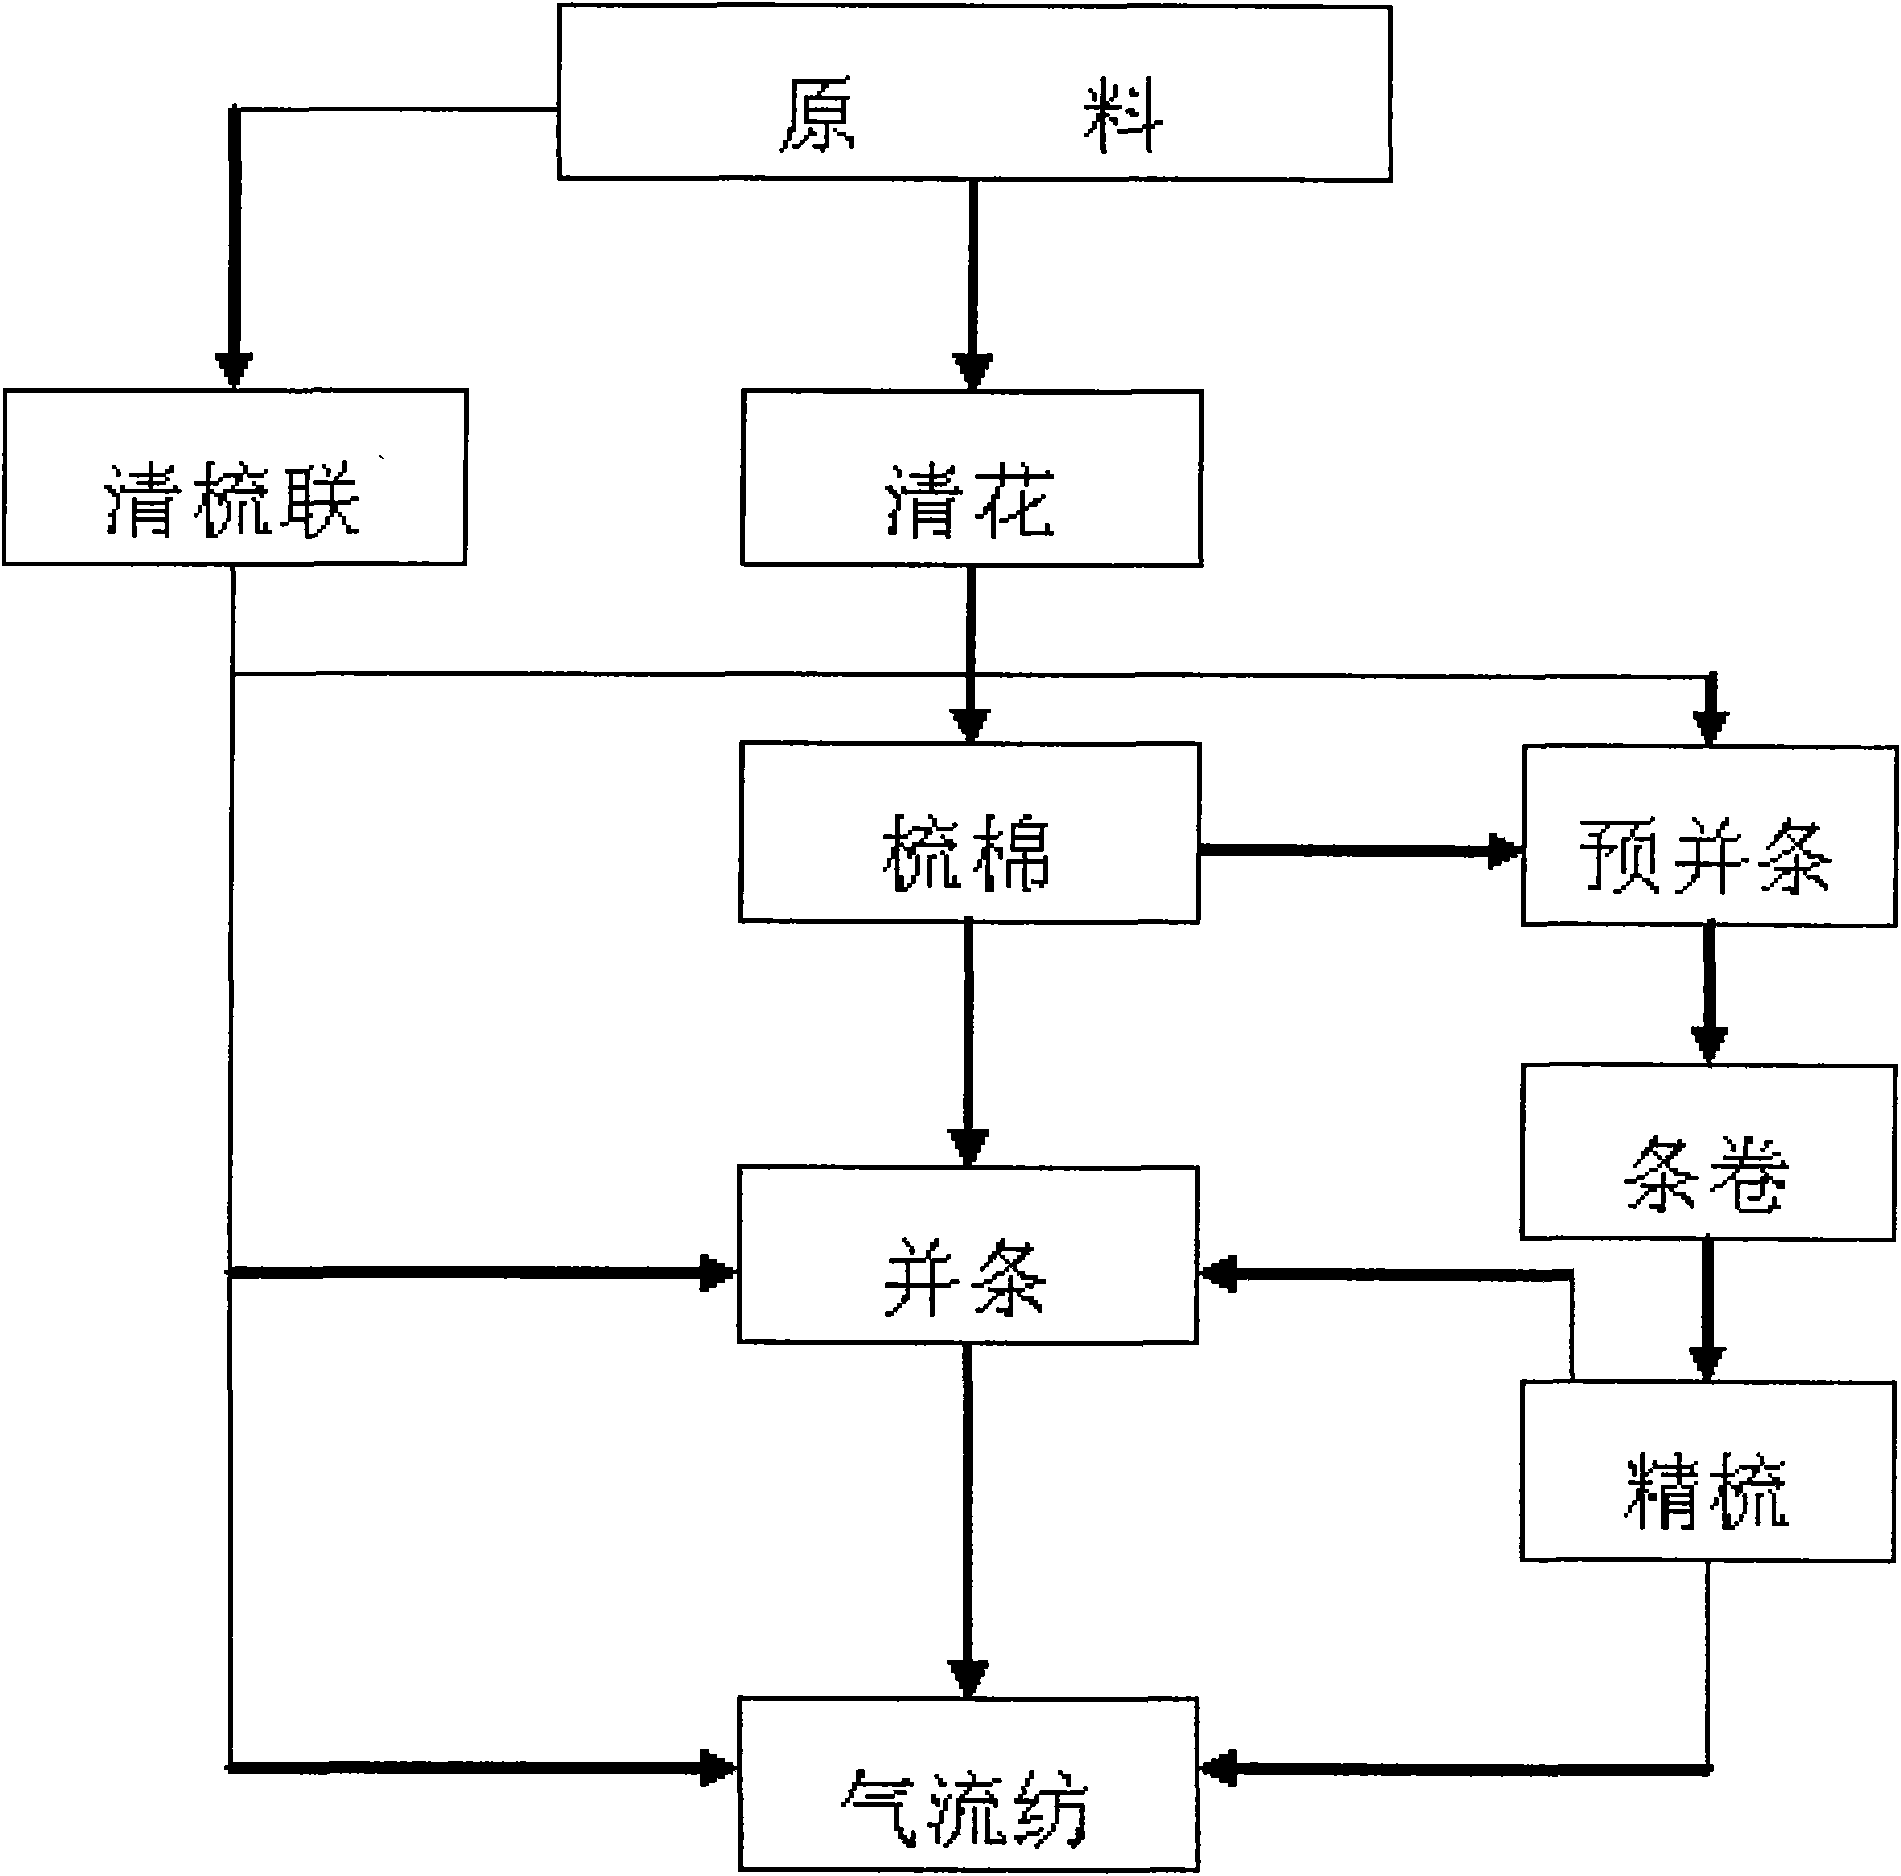 Production process for airflow-spinning stocking yarns